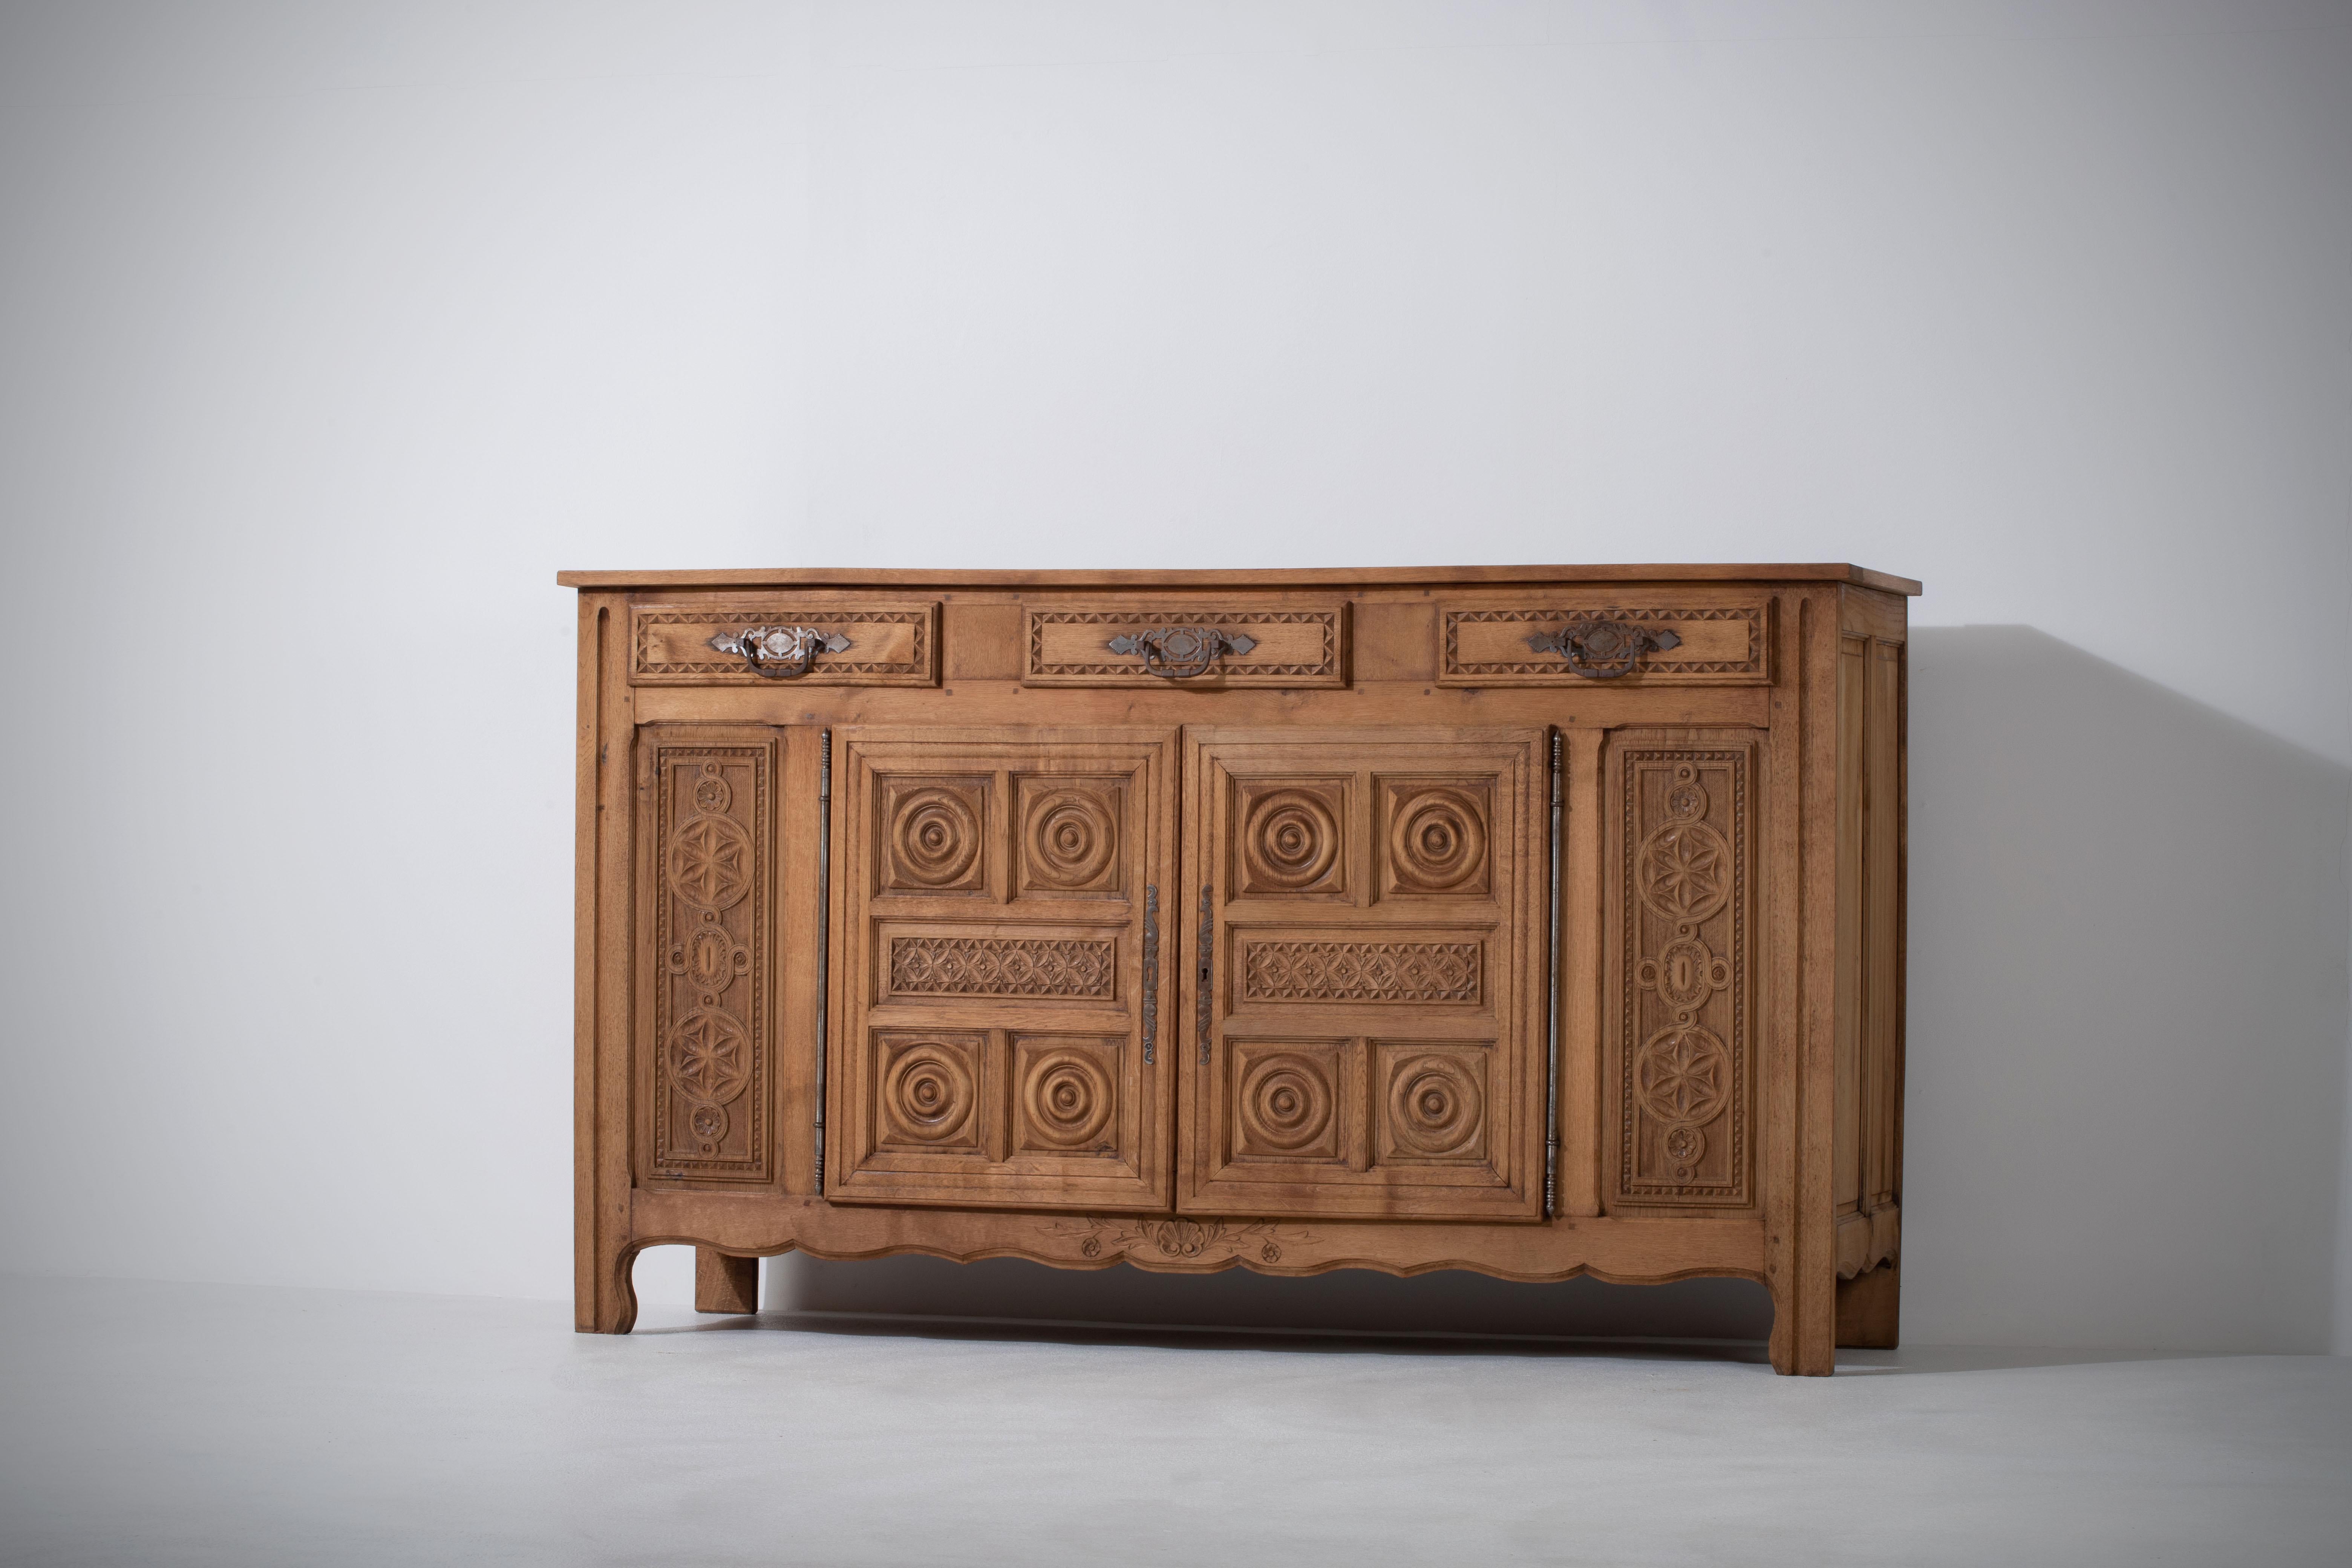 Credenza, solid oak, France, 1940s
Art Deco Brutalist sideboard. 
The credenza consists of storage facilities and covered with very detailed designed doors.